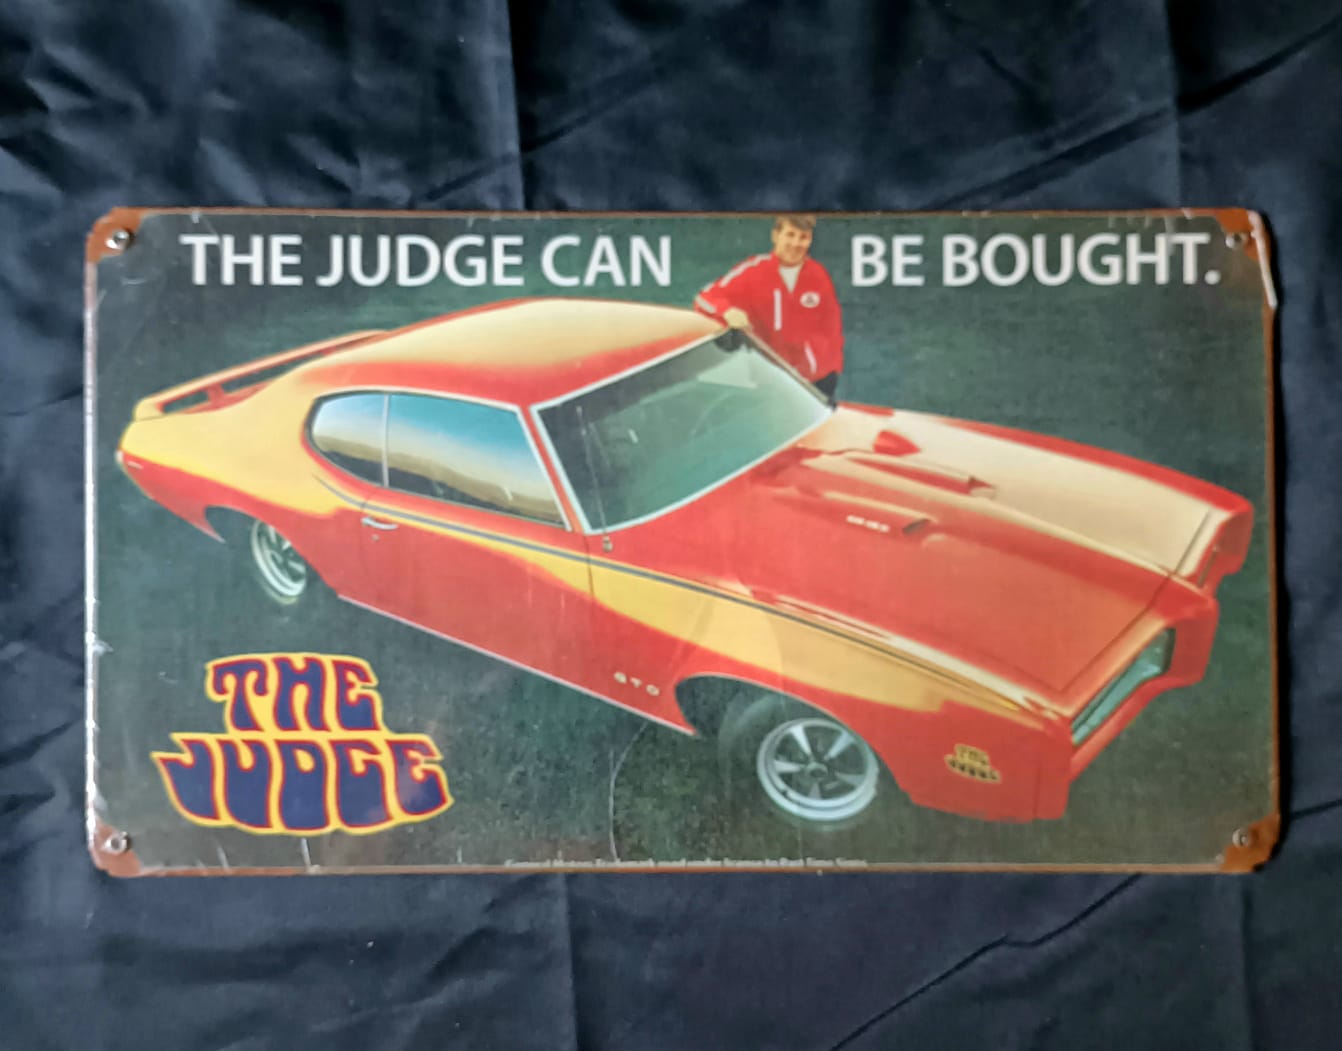 Blechschild "The Judge can be bought"